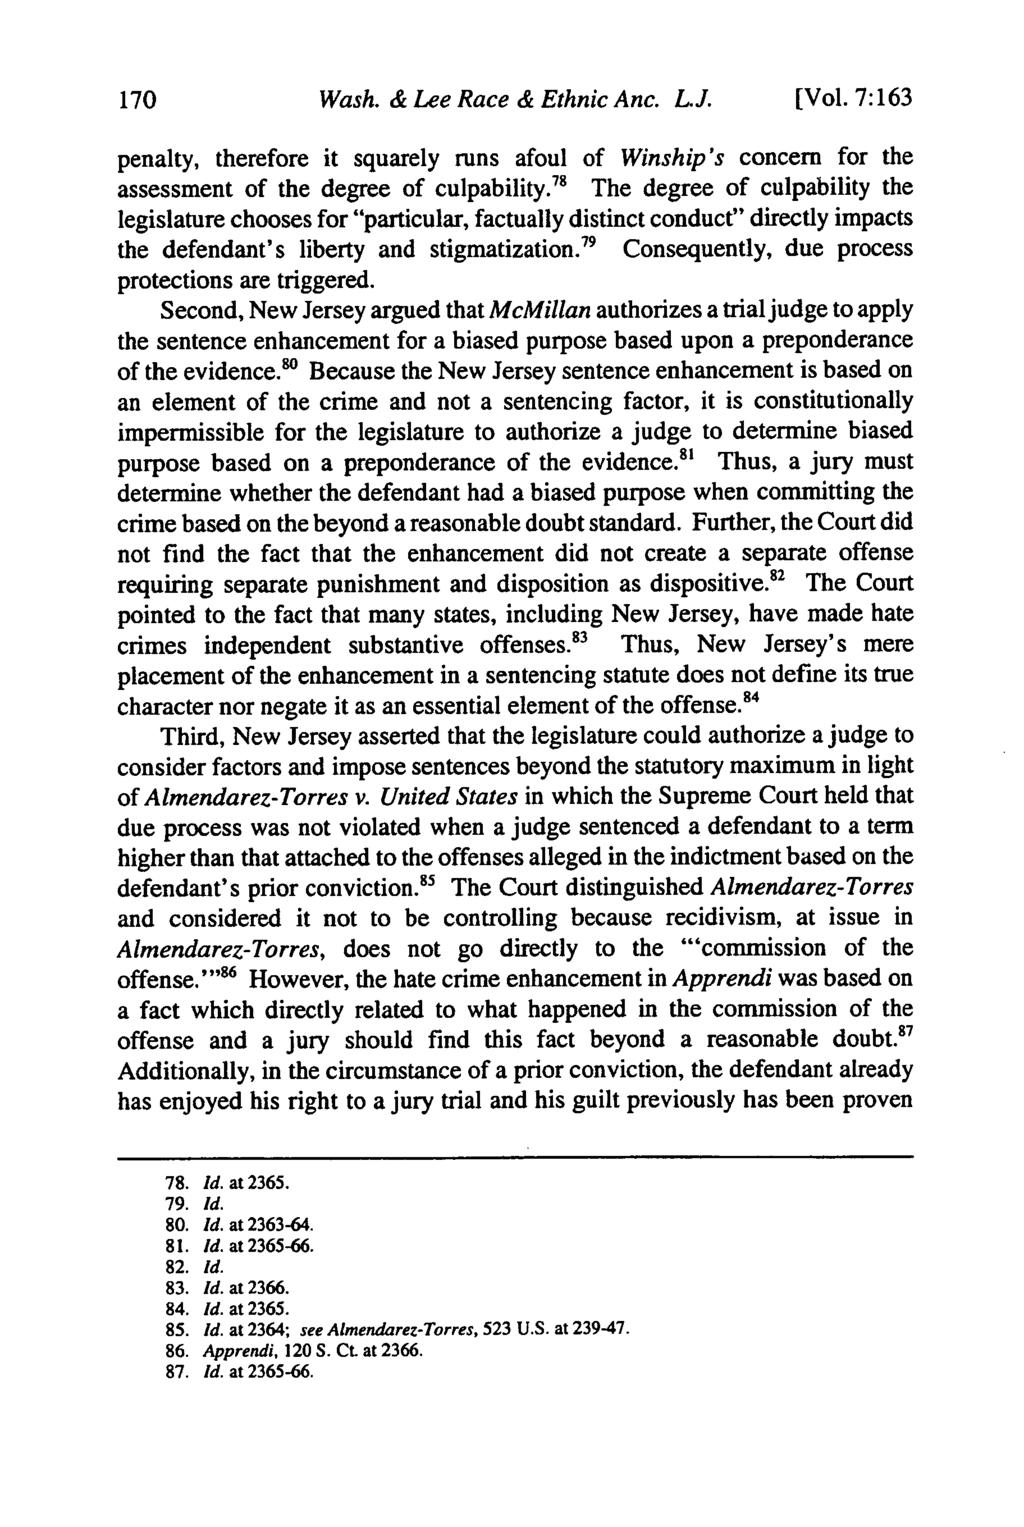 Wash. & Lee Race & Ethnic Anc. LJ. [Vol. 7:163 penalty, therefore it squarely runs afoul of Winship's concern for the assessment of the degree of culpability.